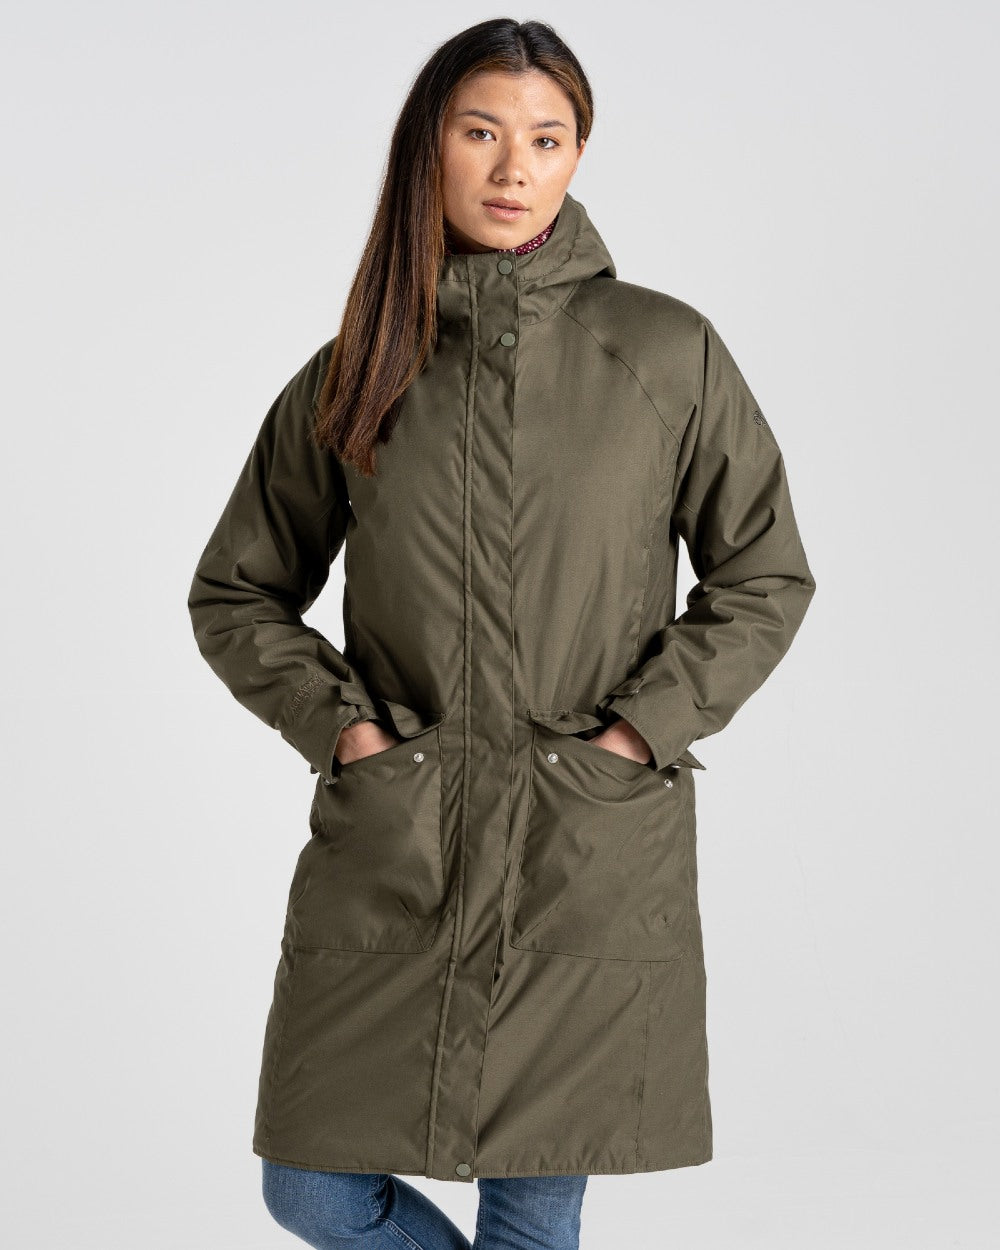 Craghoppers Caithness Long Waterproof Jacket